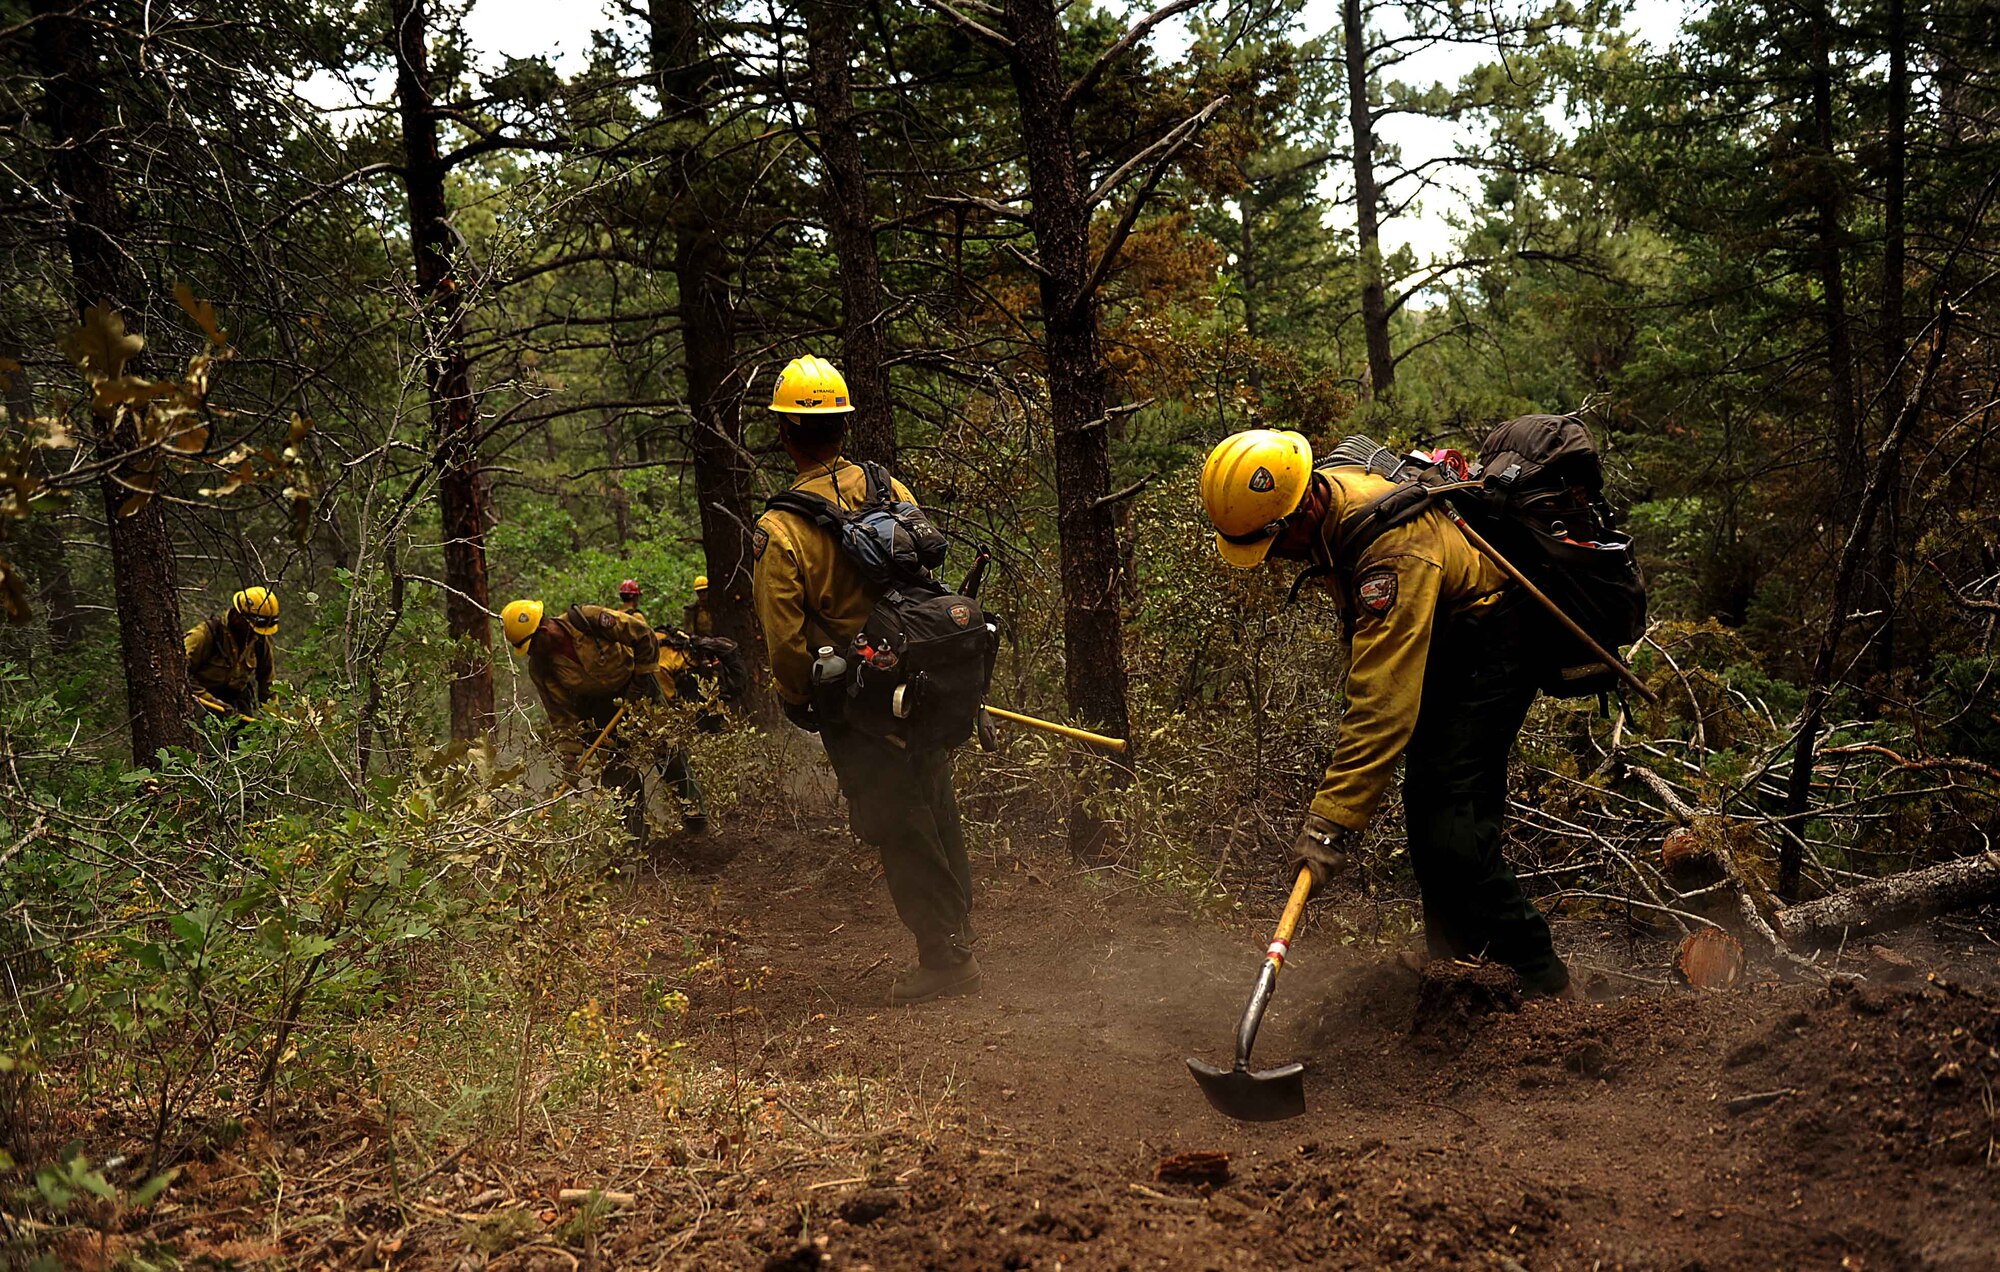 Vandenberg Air Force Base Hot Shot fire fighters cut a fire line on June 28, 2012 in the Mount Saint Francois area of Colorado Springs, Co. while helping to battle several fires in Waldo Canyon.  The Waldo Canyon fire has grown to 18,500 acres and burned over 300 homes. Currently, more than 90 firefighters from the Academy, along with assets from Air Force Space Command; F.E. Warren Air Force Base, Wyo.; Fort Carson, Colo.; and the local community continue to fight the Waldo Canyon fire.(U.S. Air Force Photo by: Master Sgt. Jeremy Lock)